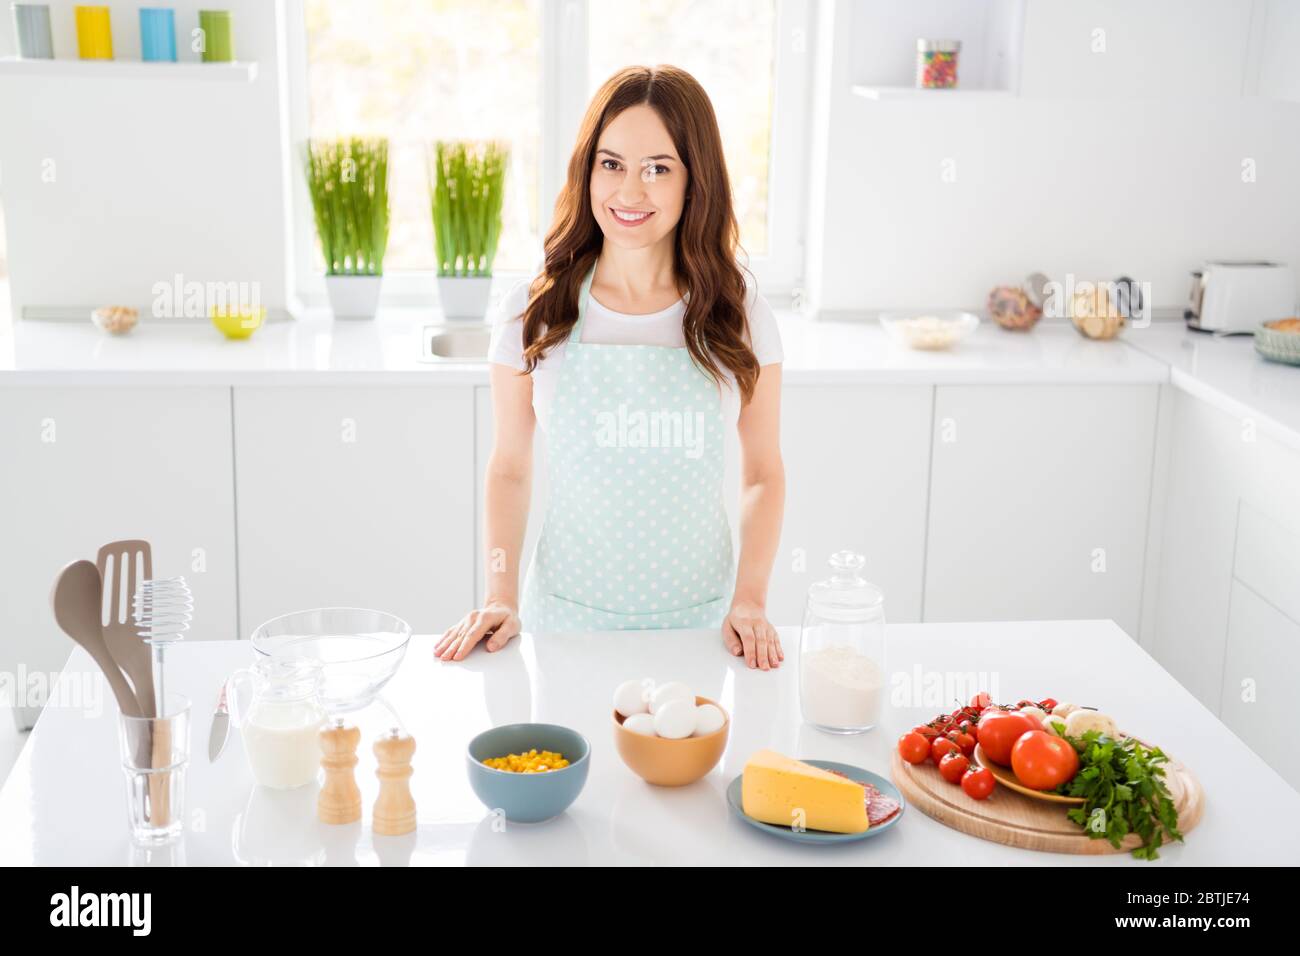 https://c8.alamy.com/comp/2BTJE74/photo-of-beautiful-housewife-chef-enjoy-morning-cooking-tasty-dinner-family-recording-video-for-blog-quarantine-stay-home-wear-apron-stand-modern-2BTJE74.jpg